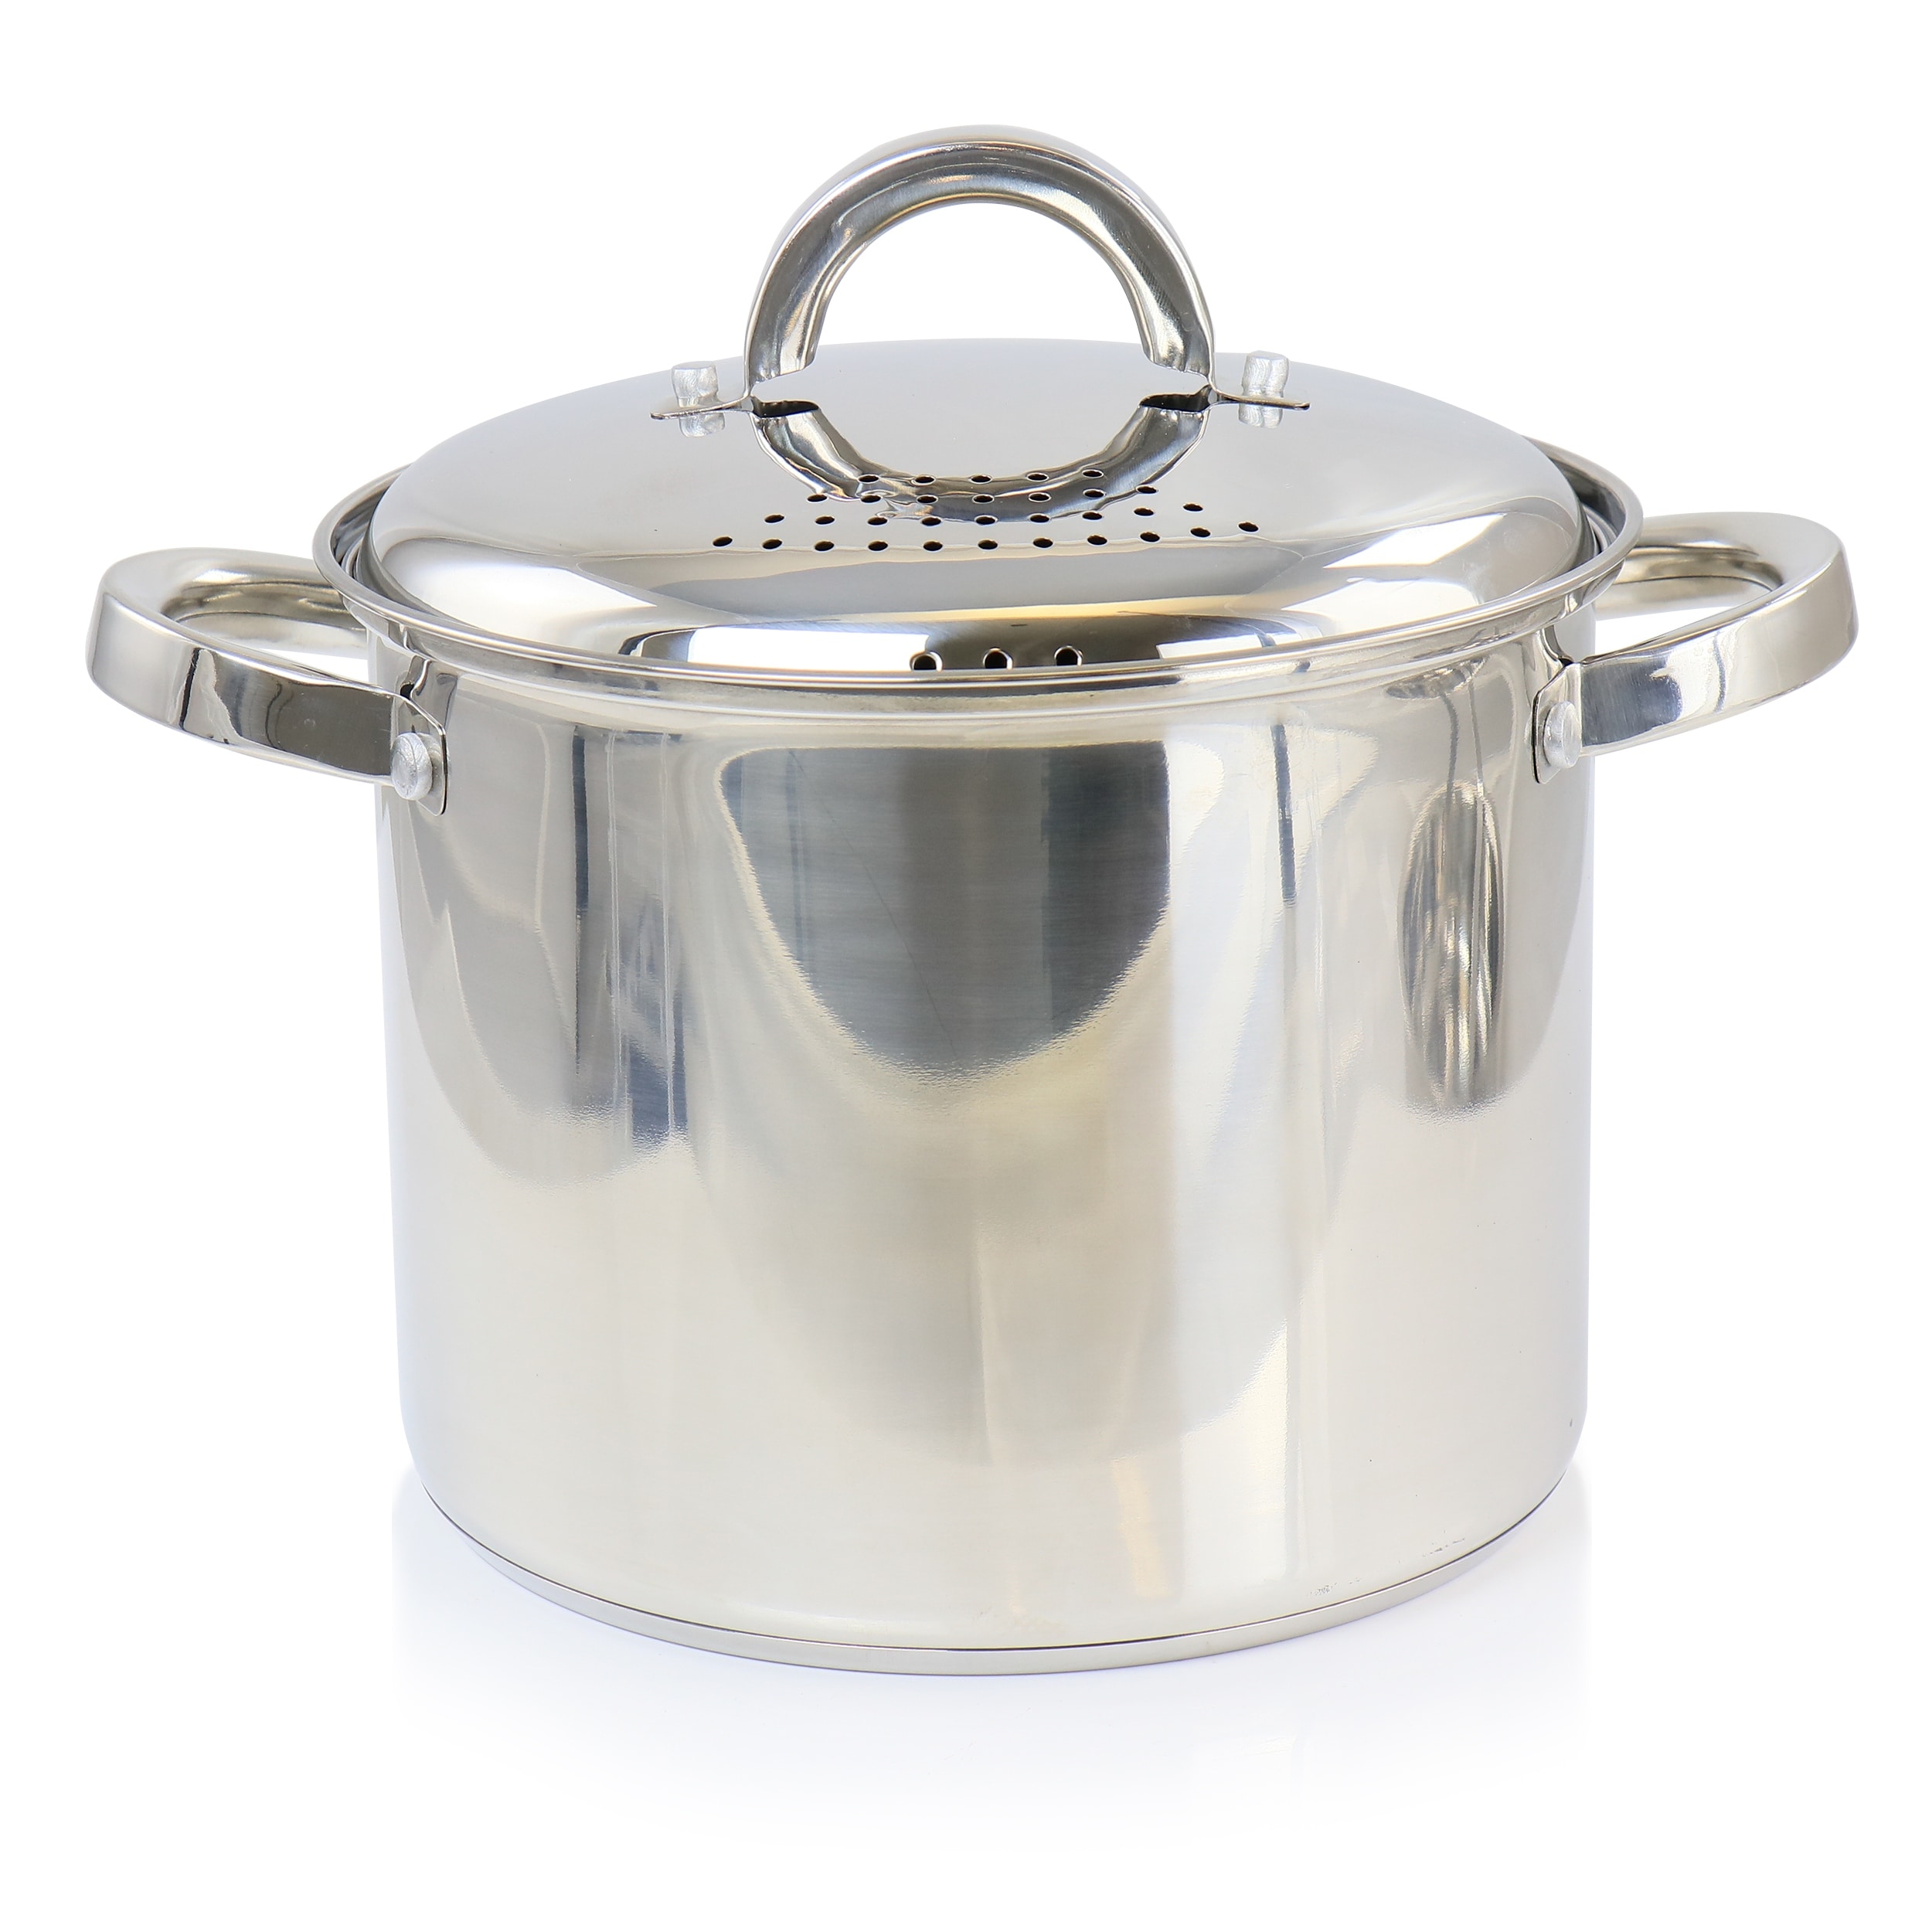 https://ak1.ostkcdn.com/images/products/is/images/direct/d2a5c37e4515de607e9e96495518e48a04086723/20-cup-Stainless-Steel-Pasta-Pot-with-Strainer-Lid-and-Steamer-Insert.jpg